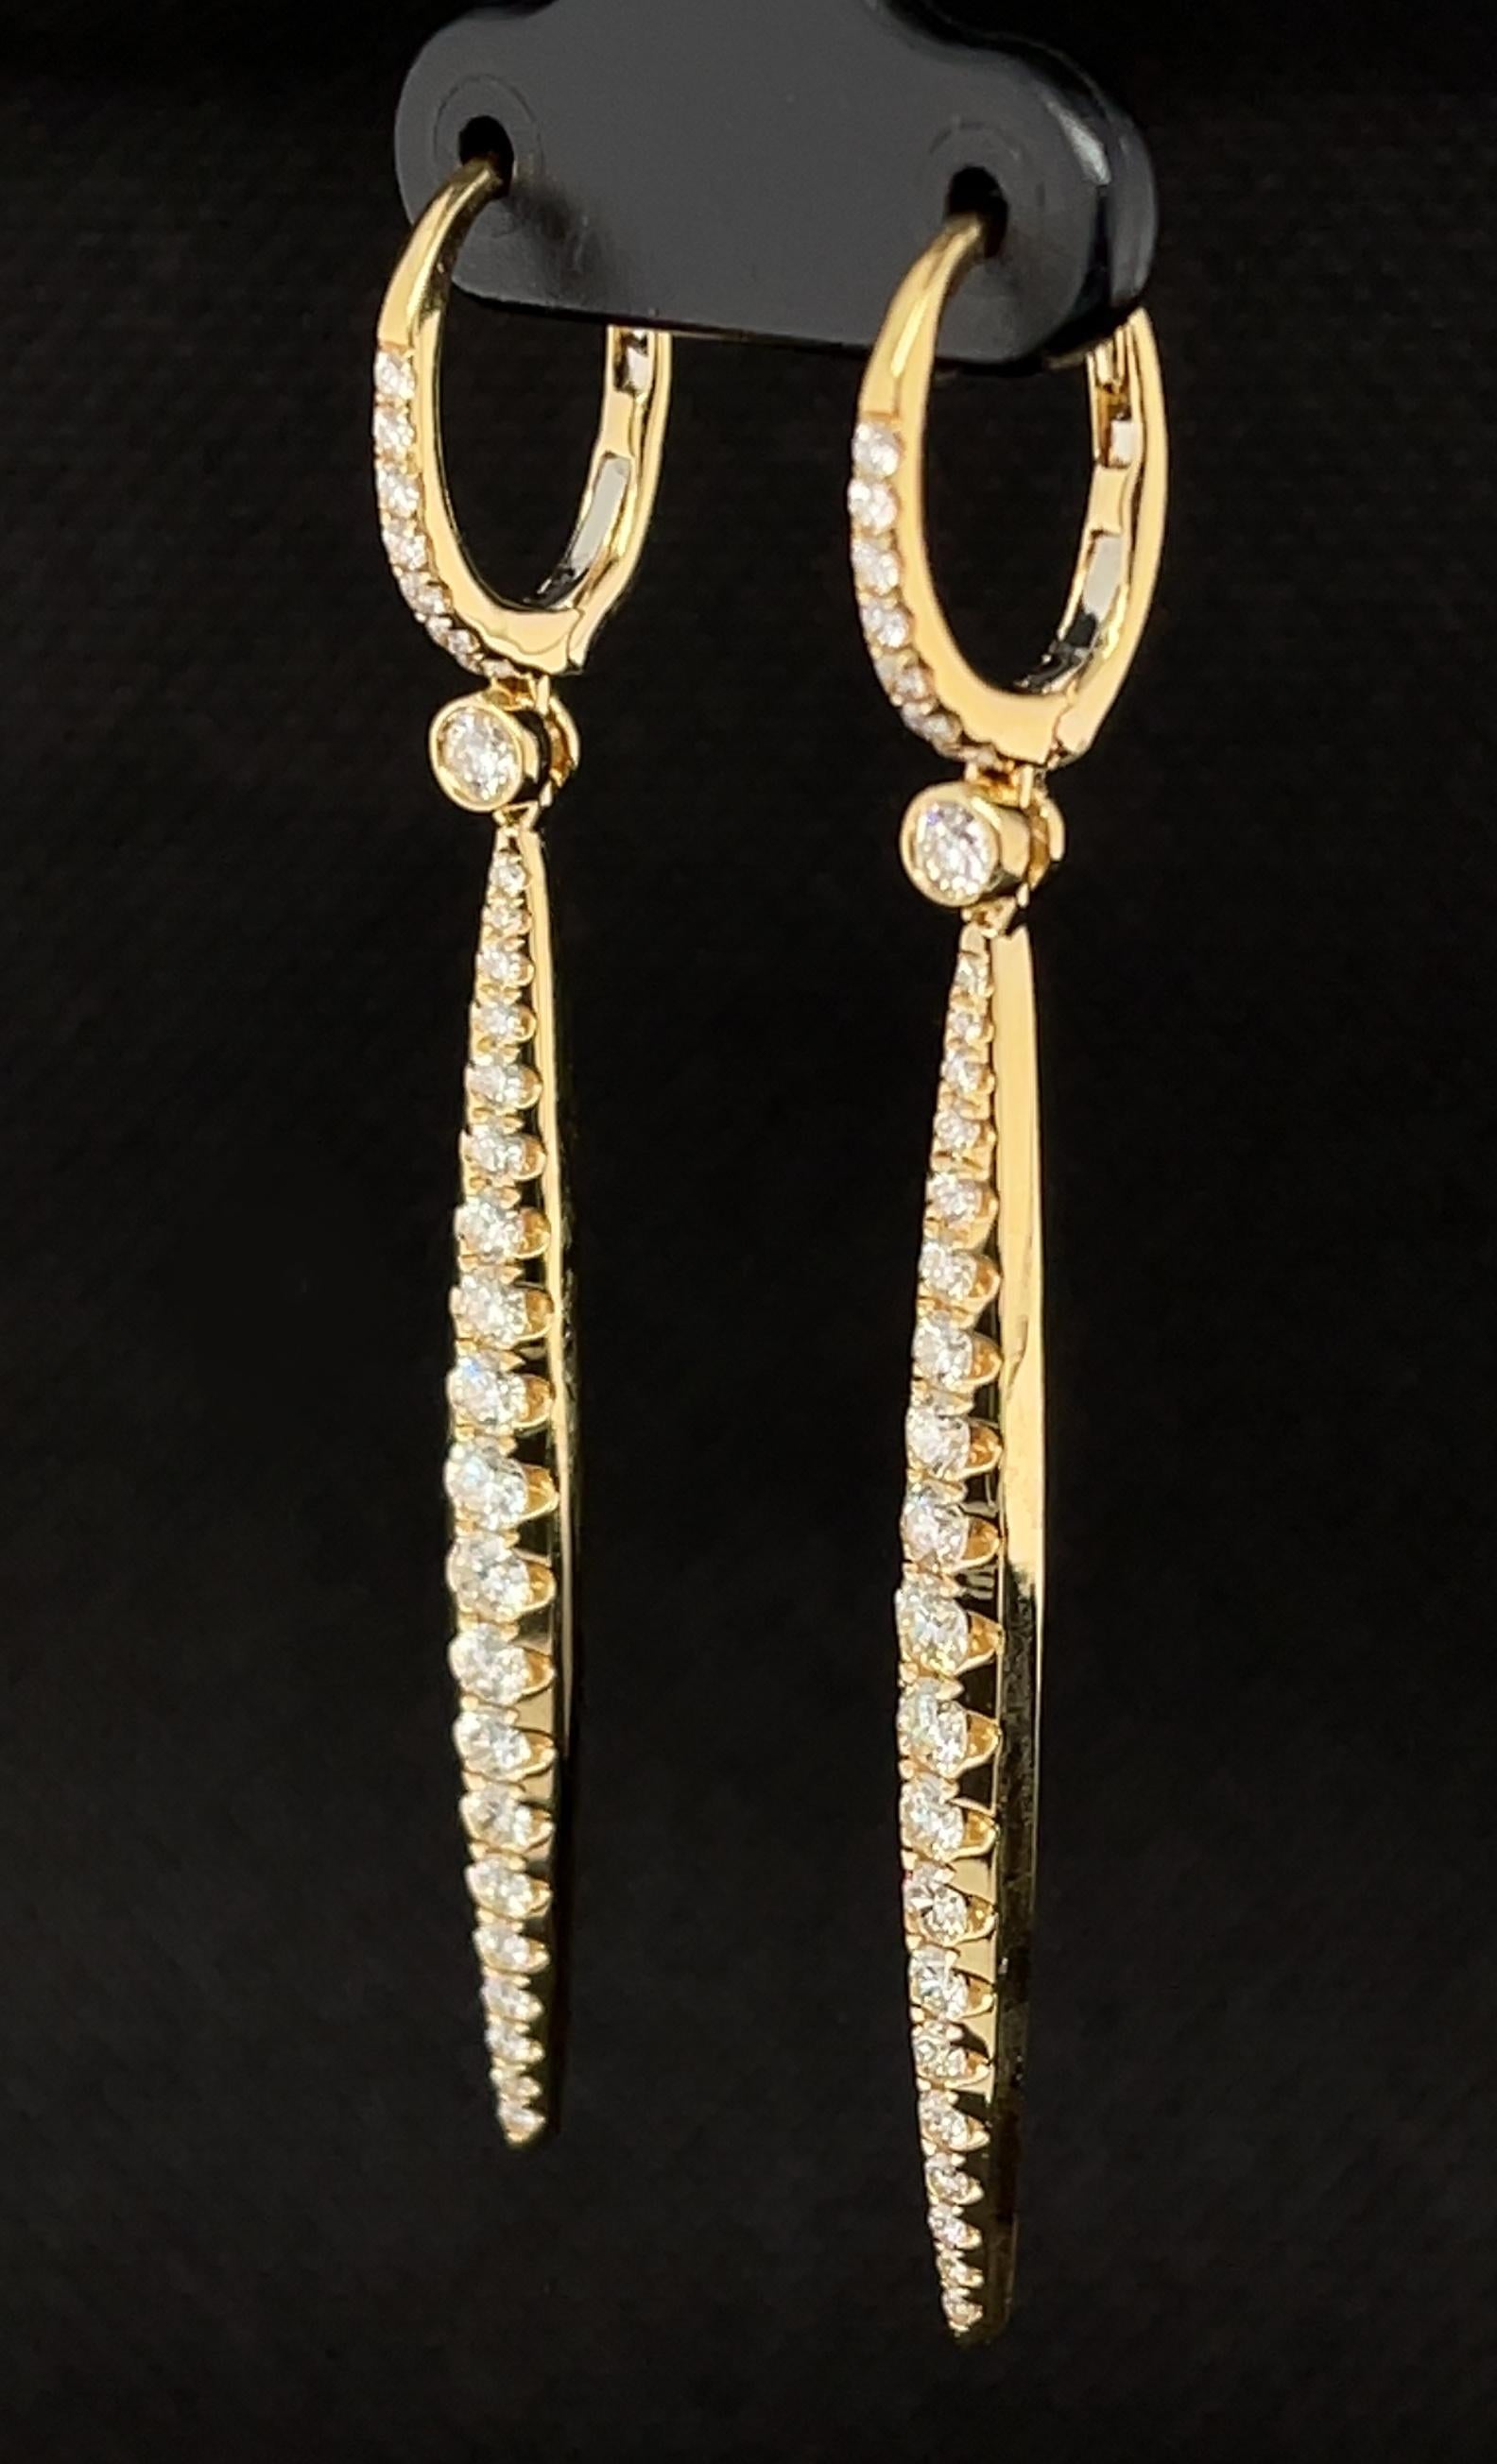 Round Cut Diamond Pave Linear Dangling Earrings in Yellow Gold, 1.31 Carats Total  For Sale